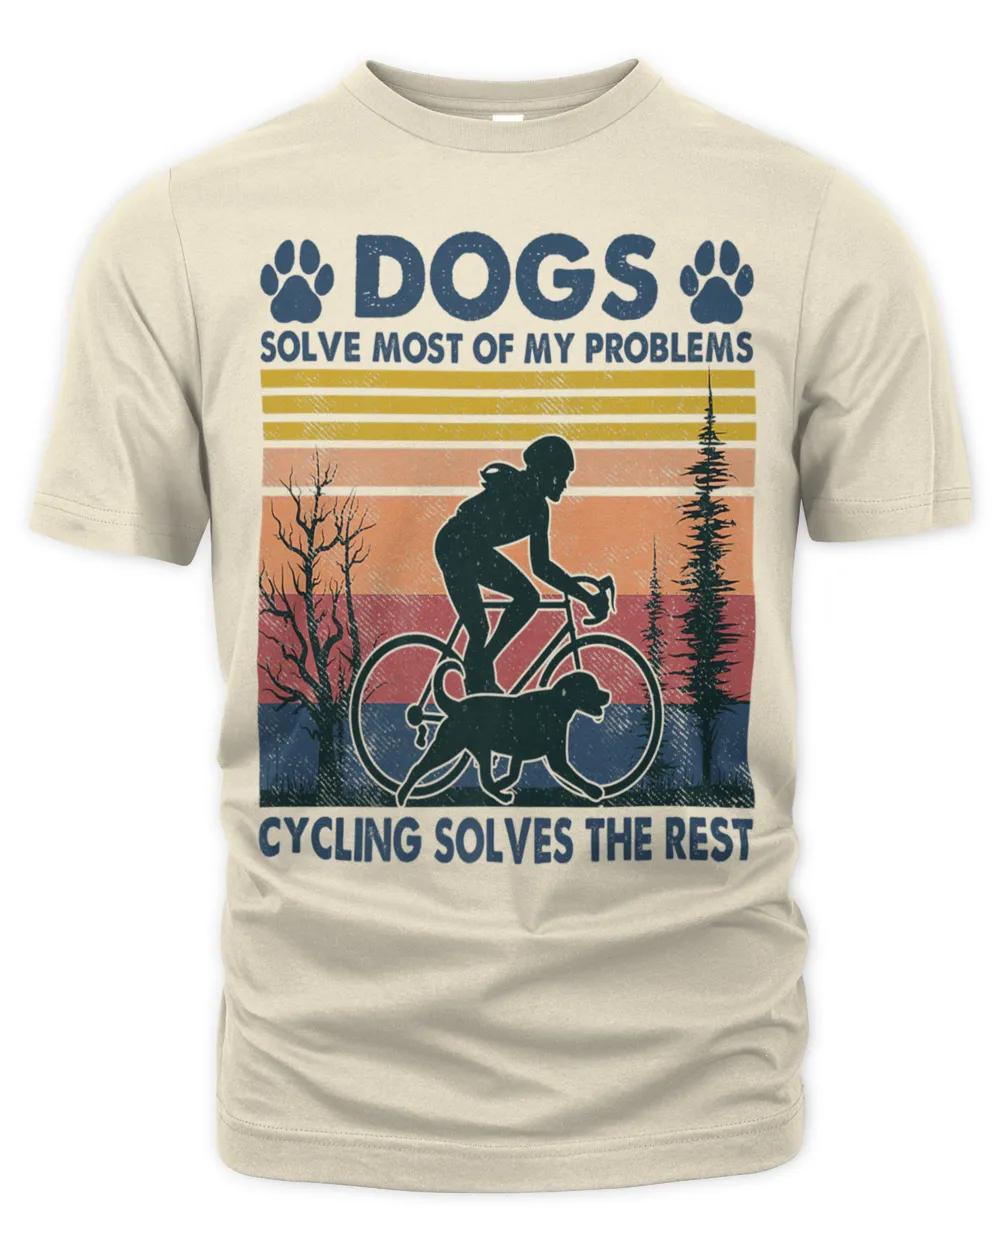 Dog solves most of my problems cycling solves the rest